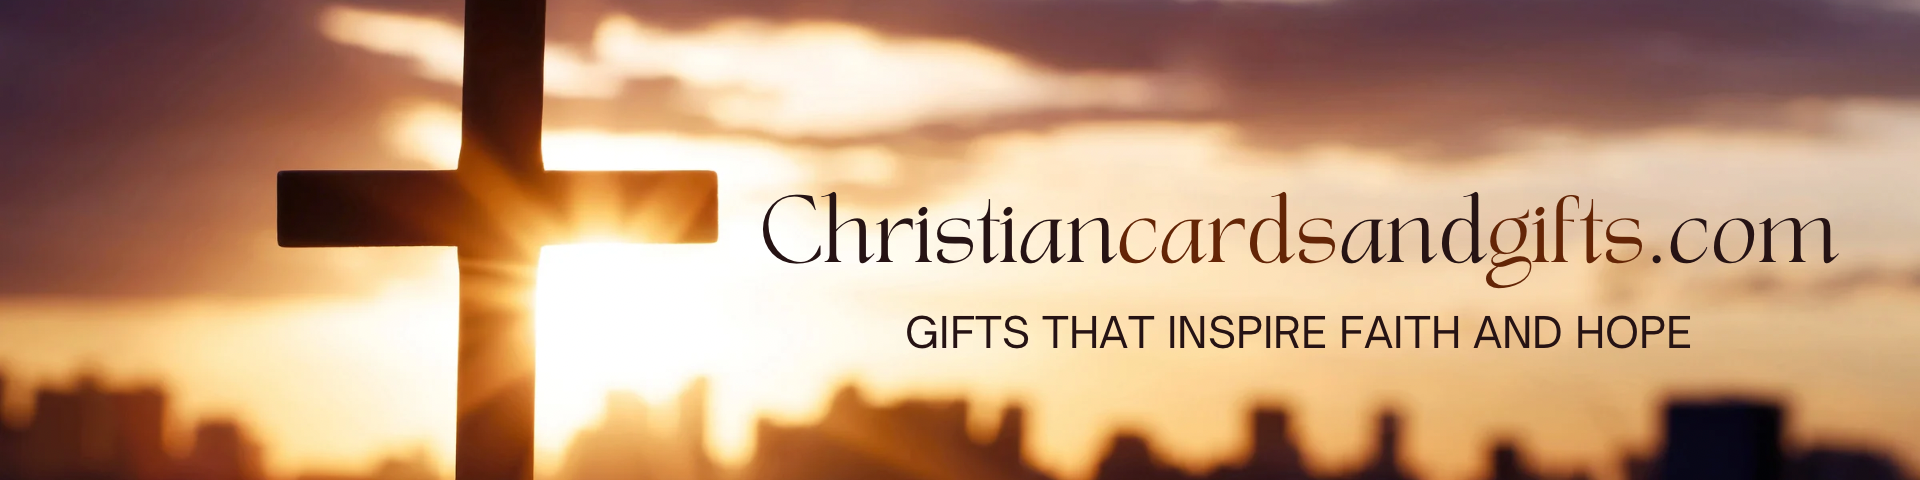 Best Selection of Christian Greeting Cards